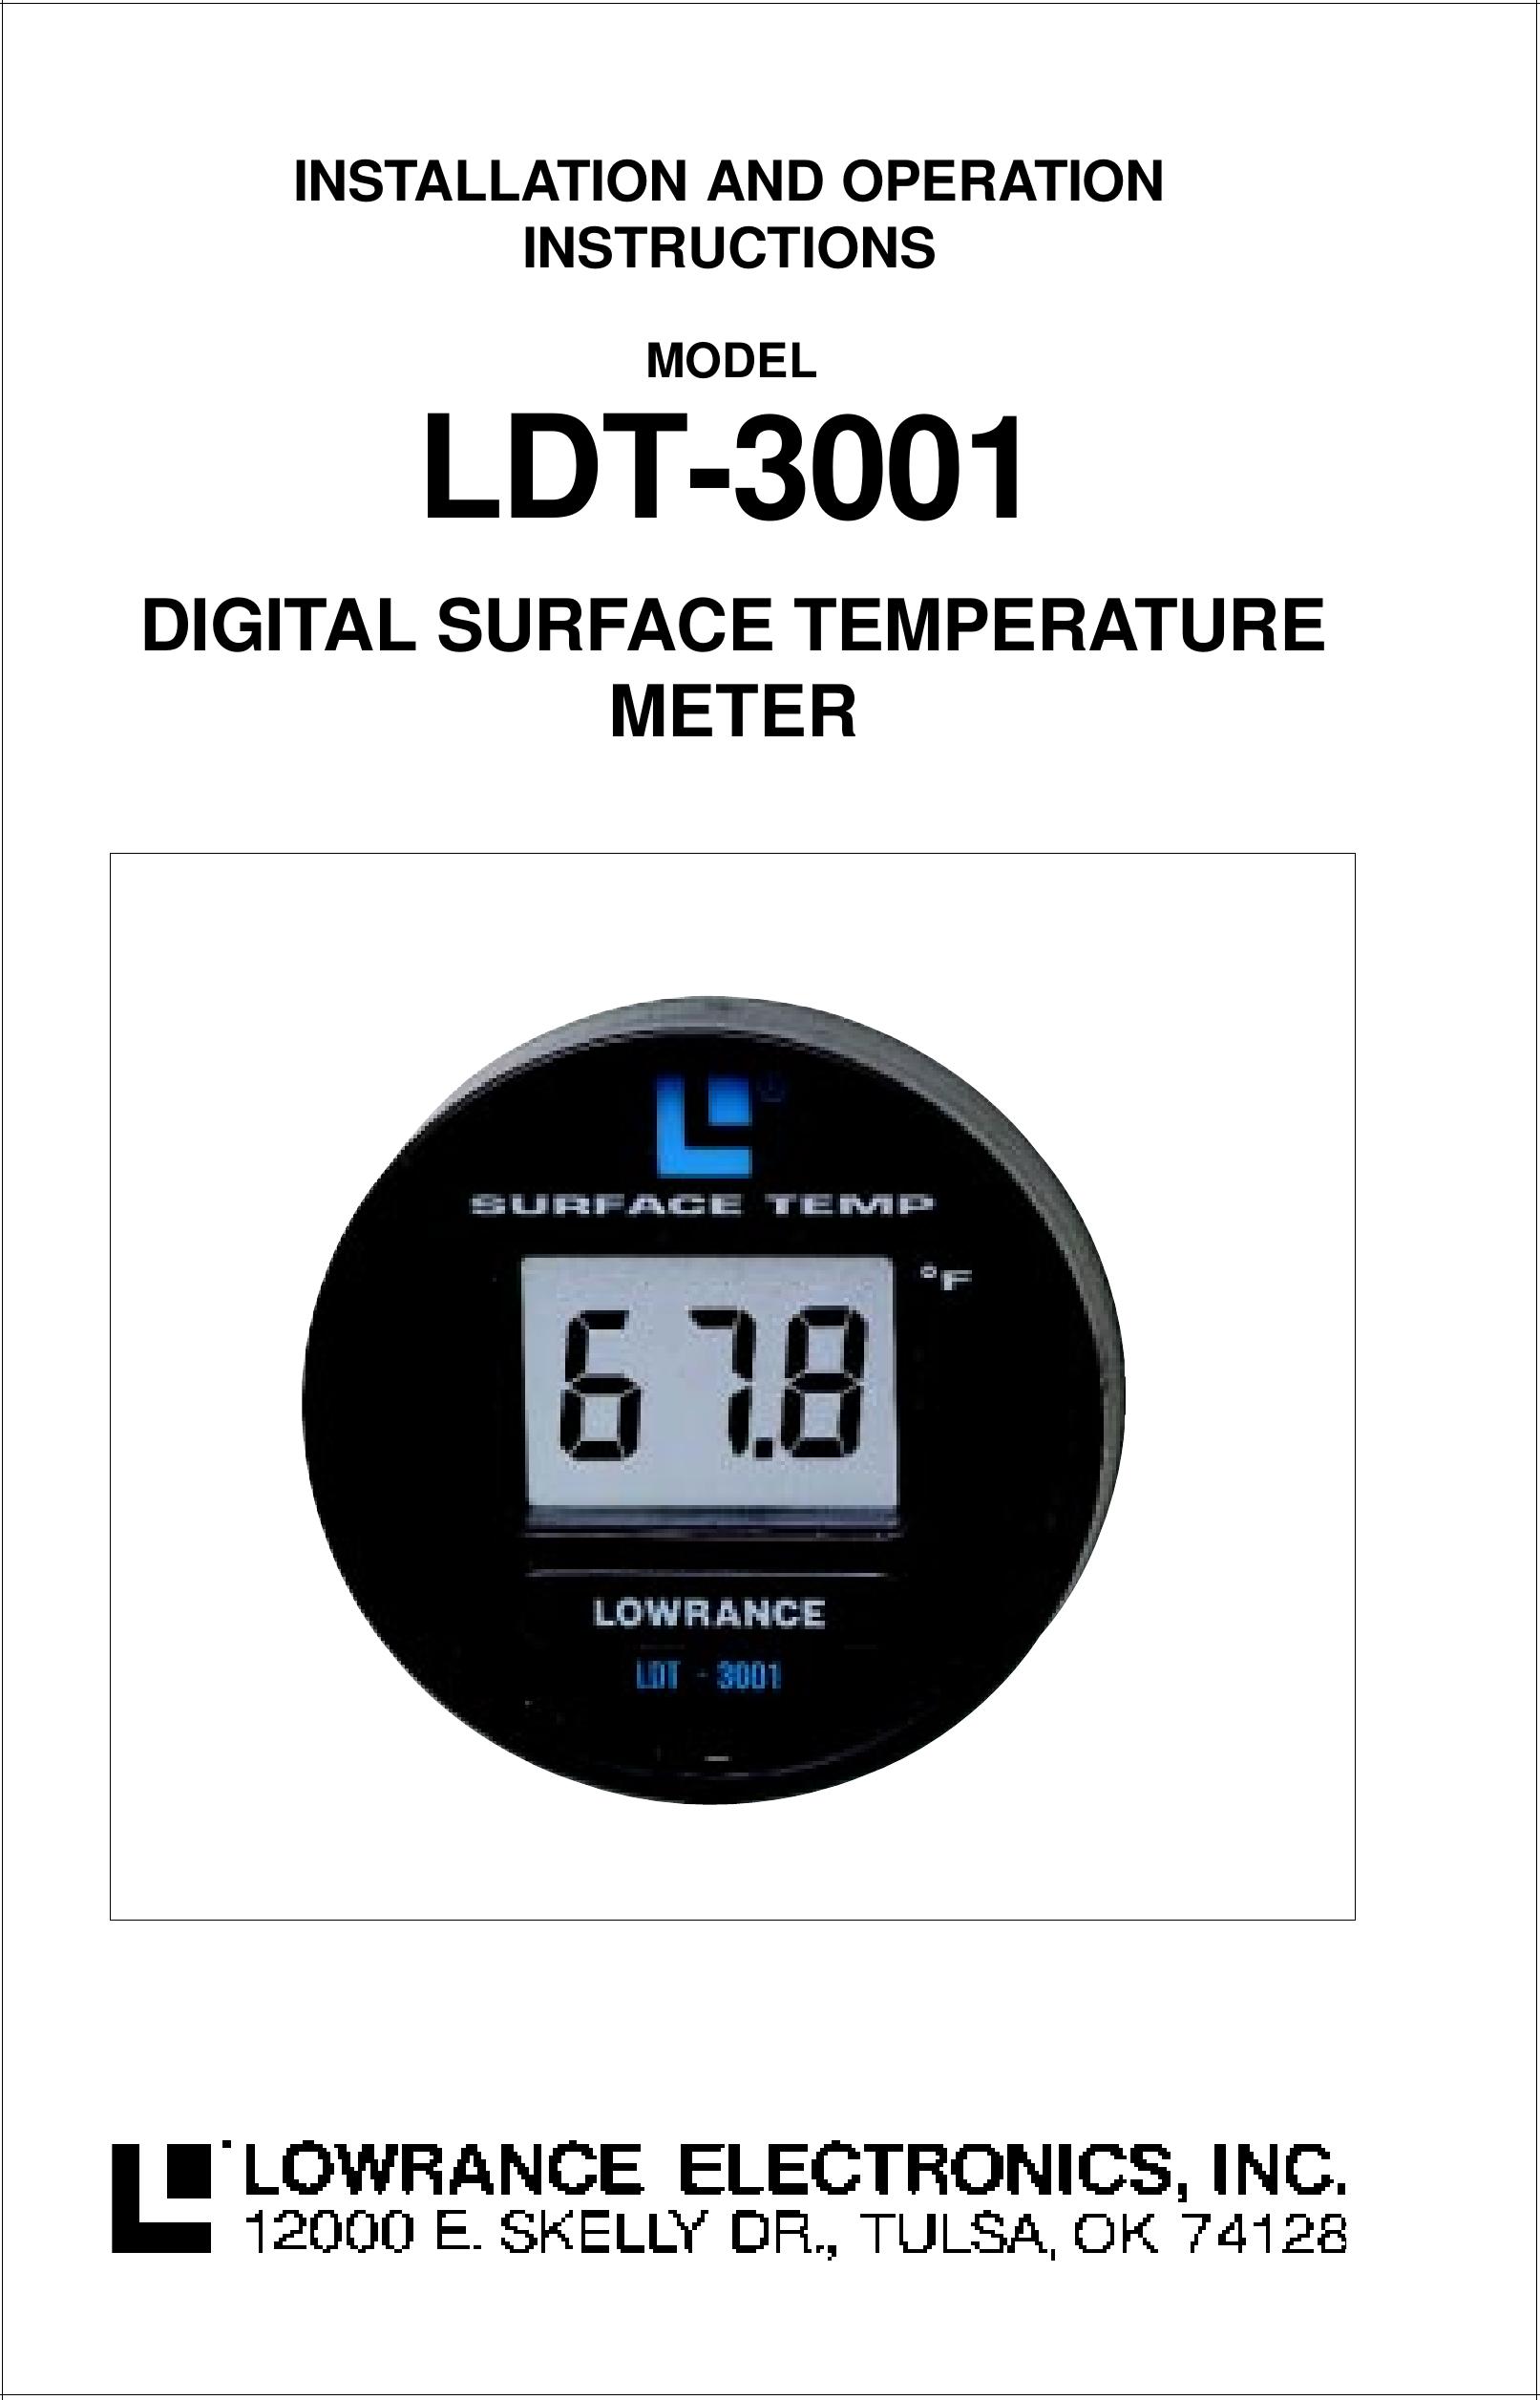 Lowrance electronic LDT-3001 Thermometer User Manual